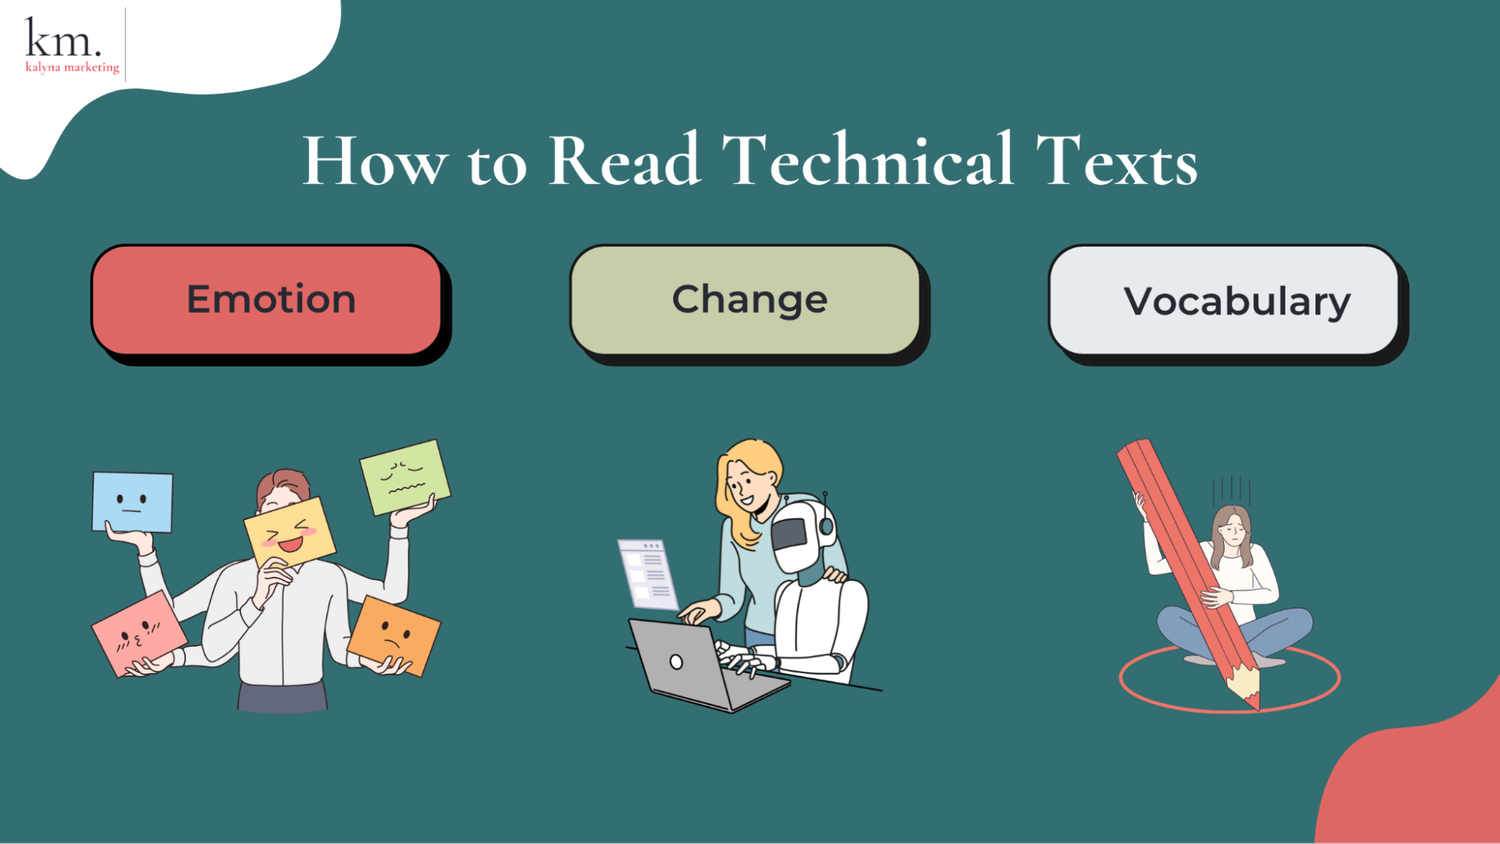 "How to Read Technical Texts" with three steps: emotion, change, and vocabulary.